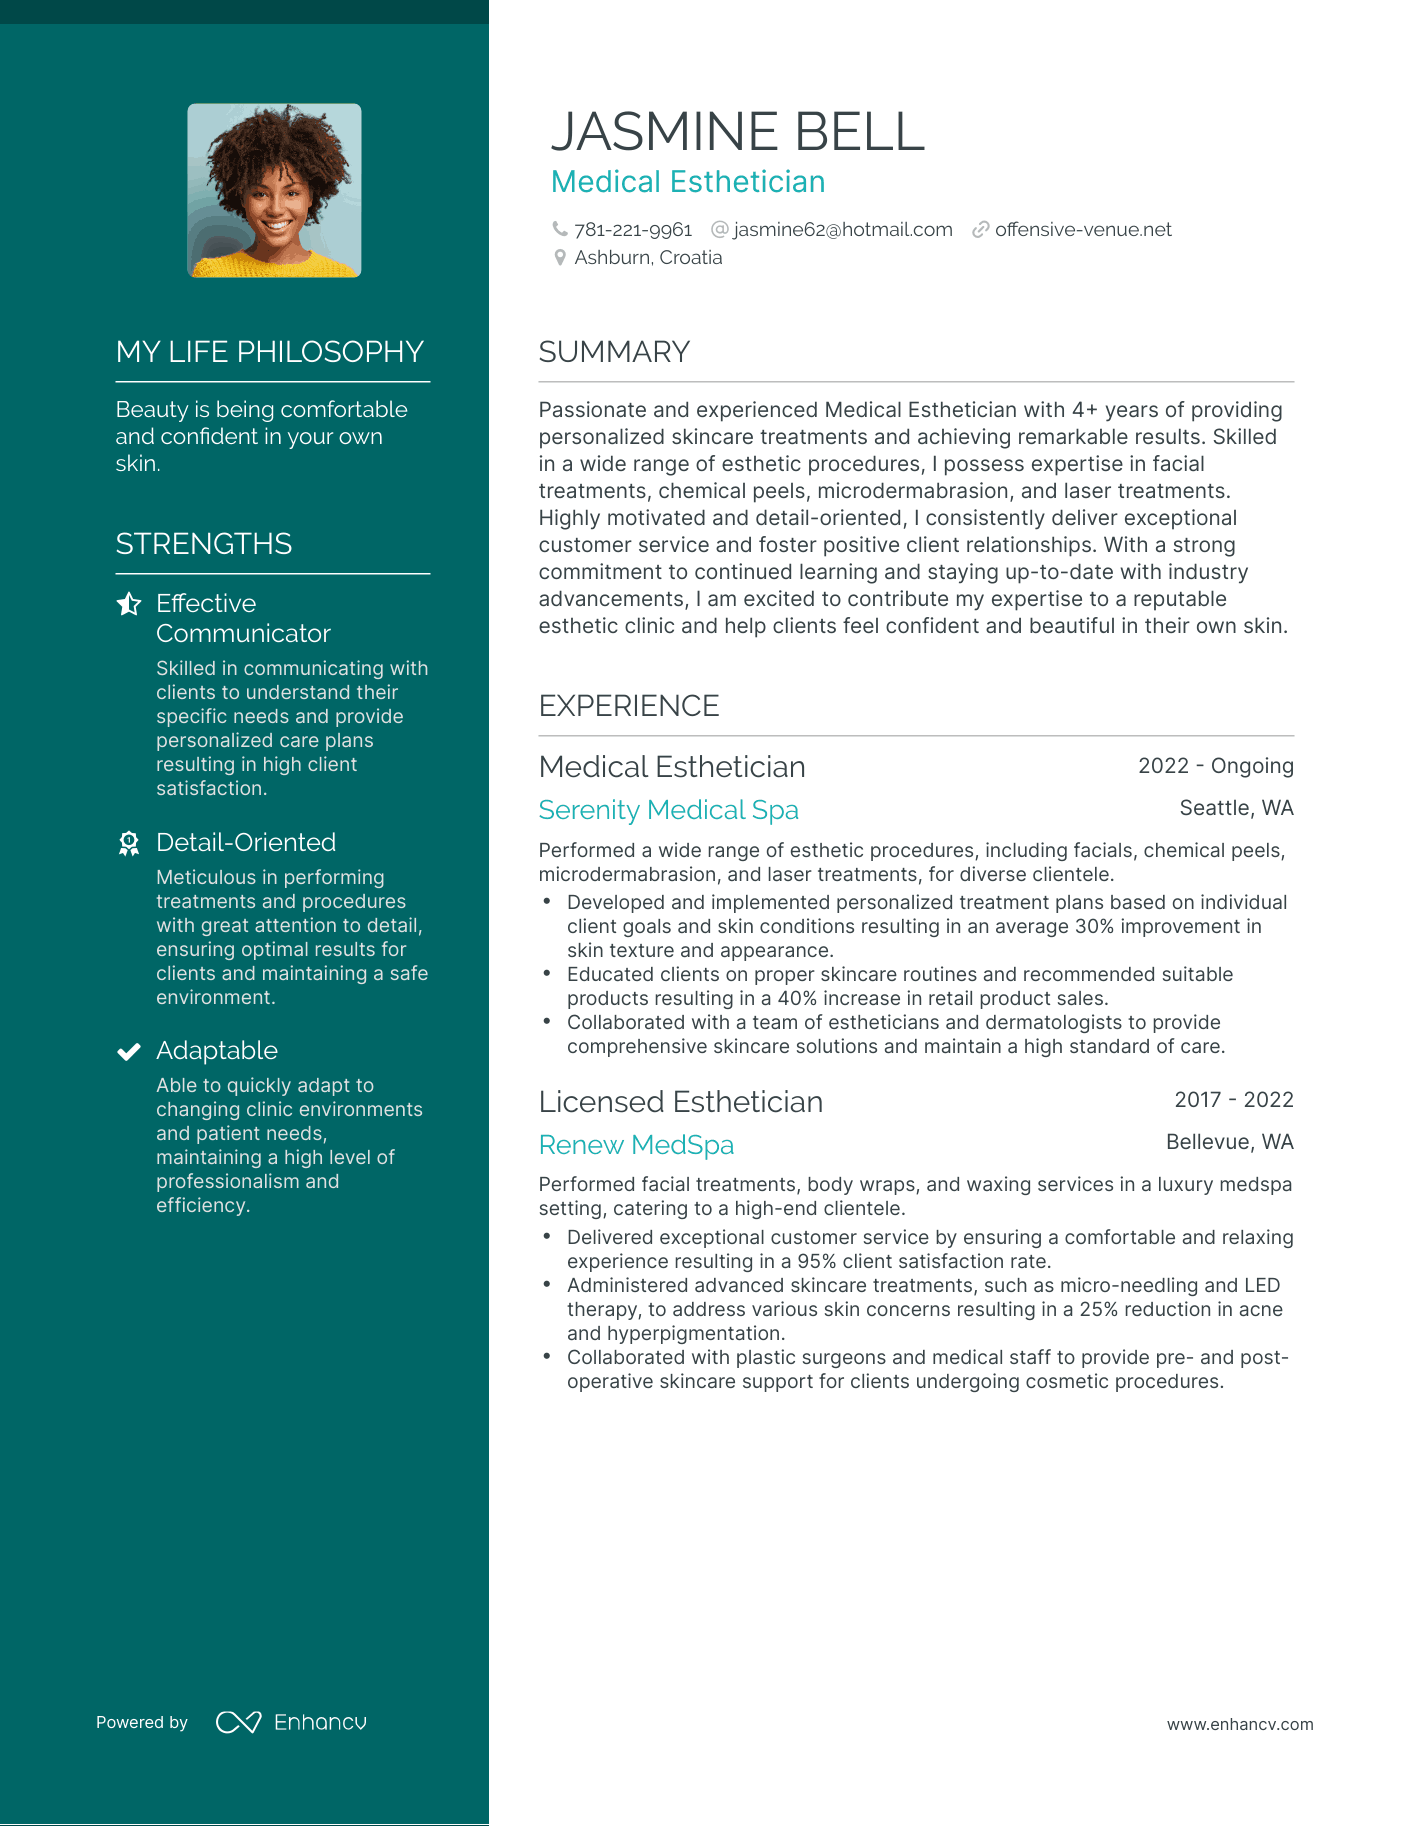 esthetician resume about me examples